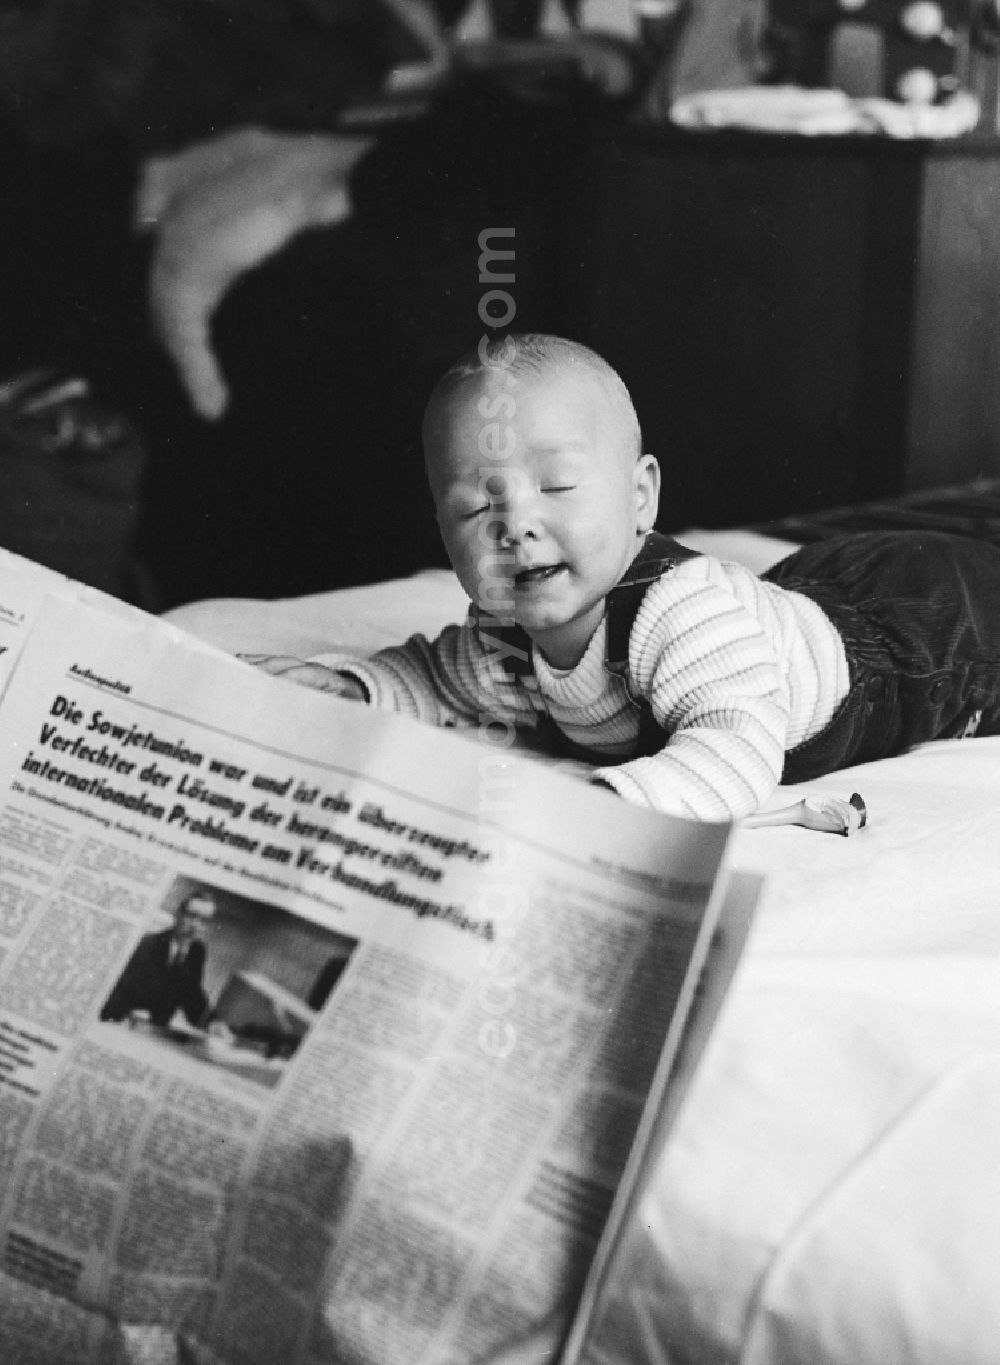 GDR image archive: Berlin - A toddler on a playmat in Berlin, the former capital of the GDR, the German Democratic Republic. In the foreground, a daily newspaper